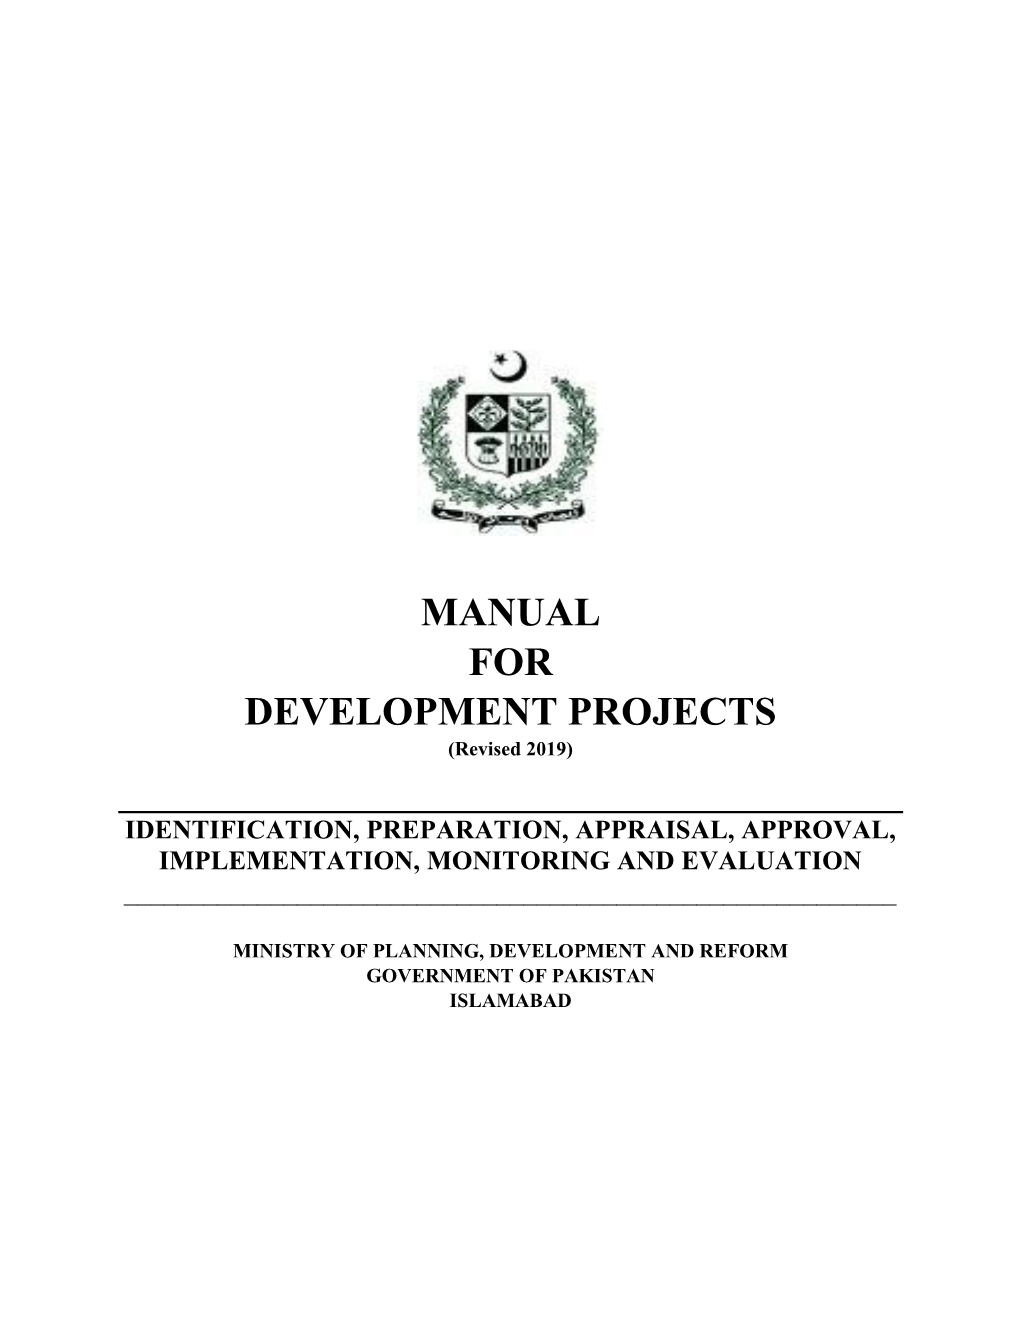 MANUAL for DEVELOPMENT PROJECTS (Revised 2019)